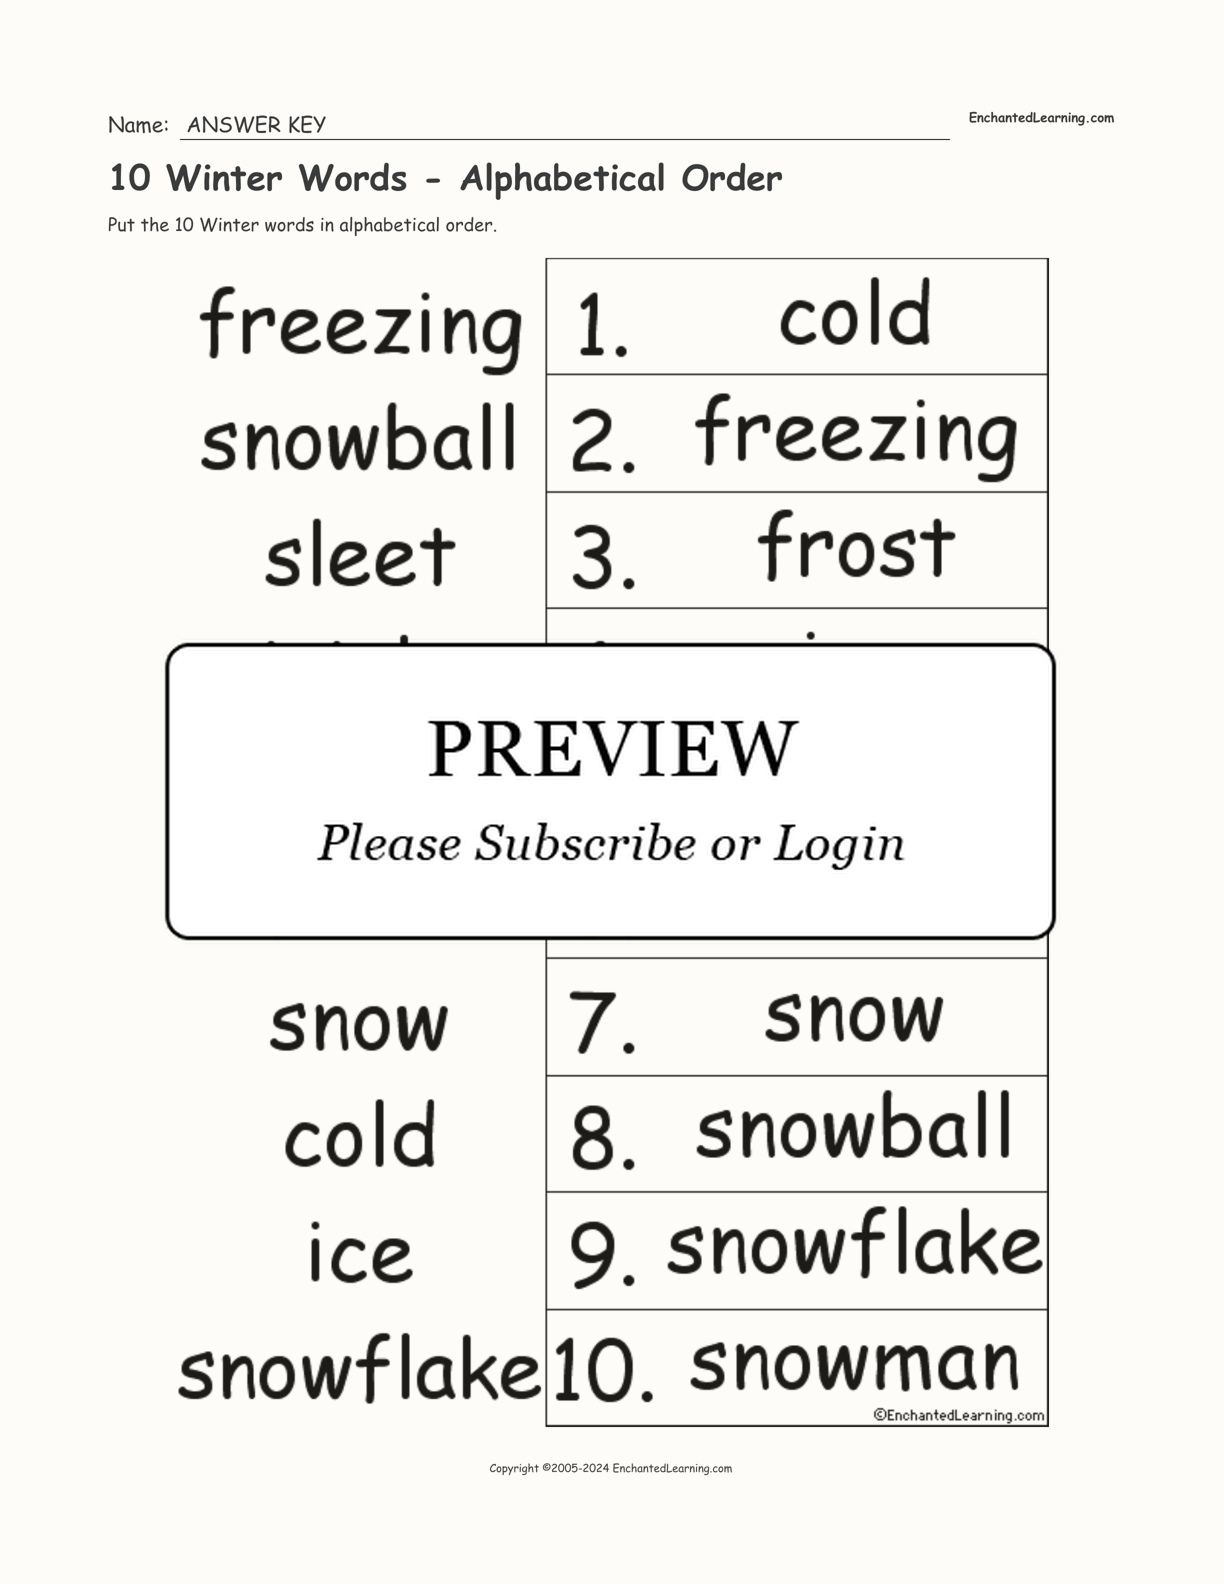 10 Winter Words - Alphabetical Order interactive worksheet page 2